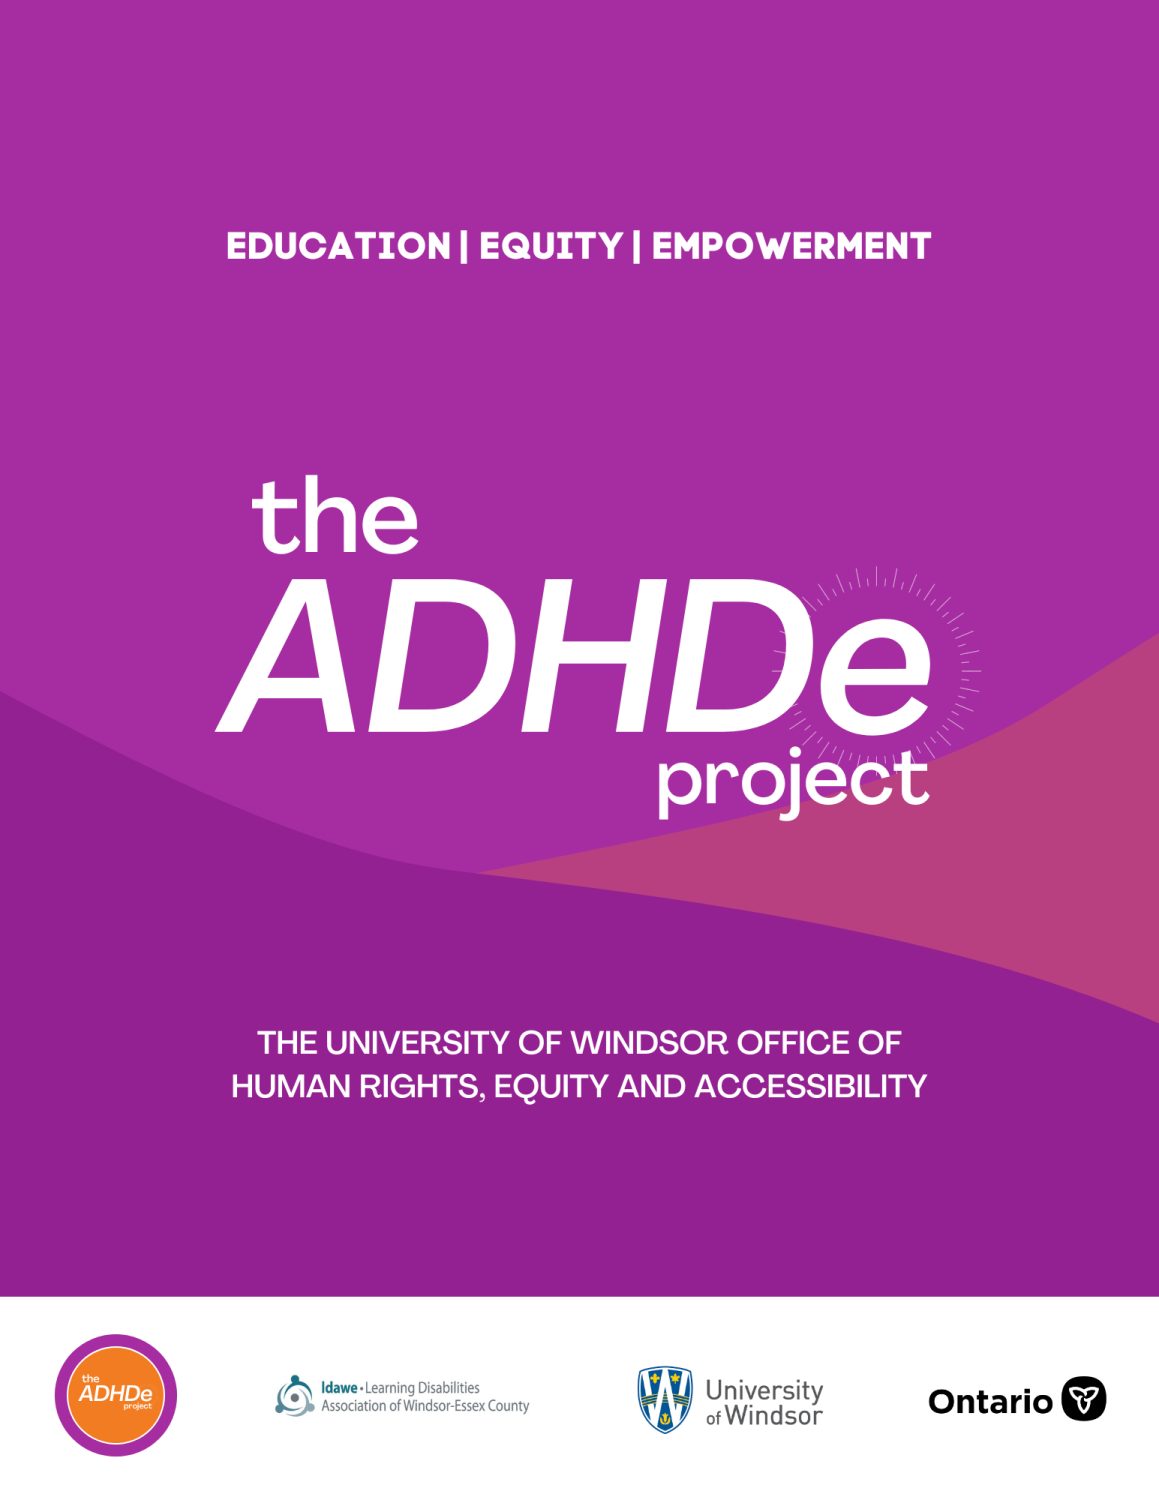 Cover image for the ADHDe project